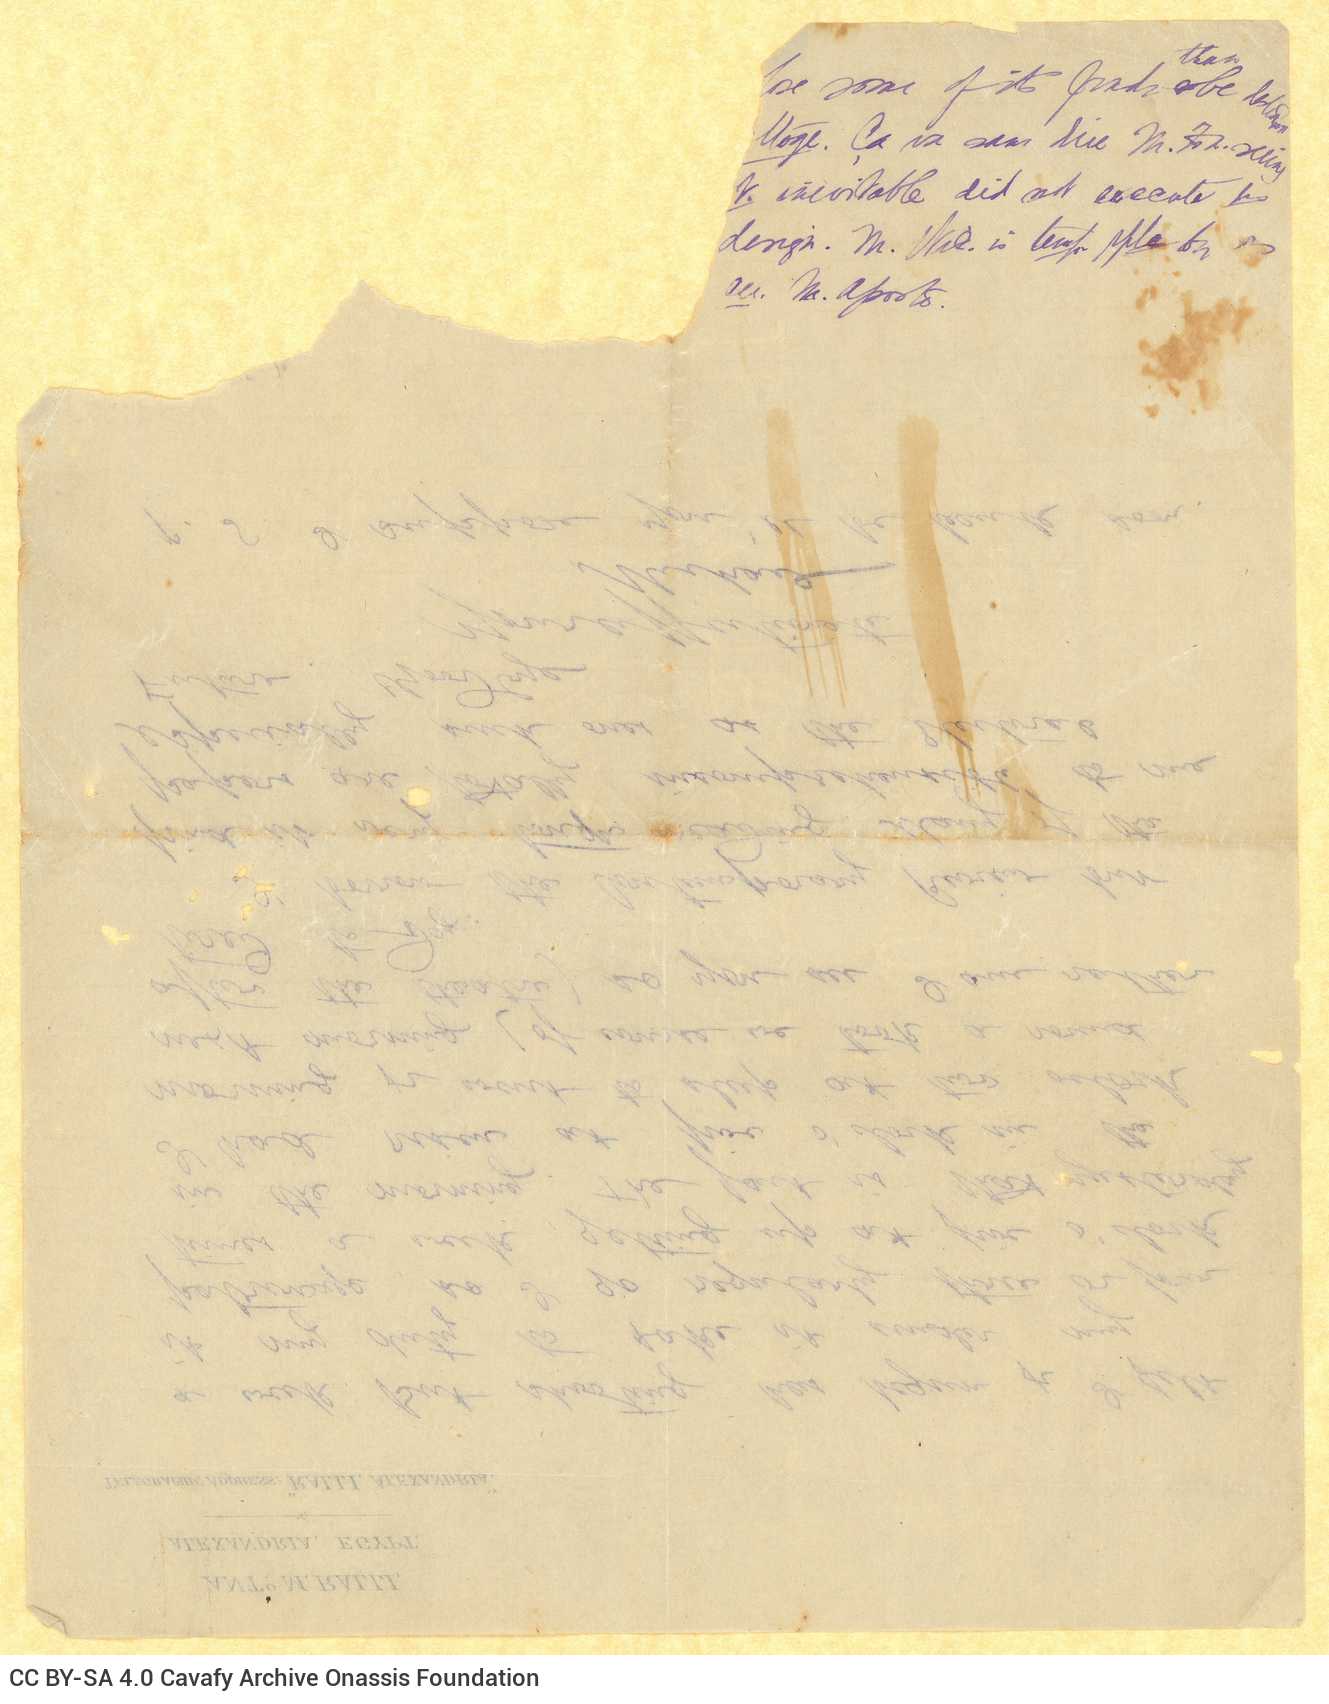 Handwritten letter by Mike Ralli to Cavafy on three sheets, with notes on the rectos. Comments on the matter of negotiations 